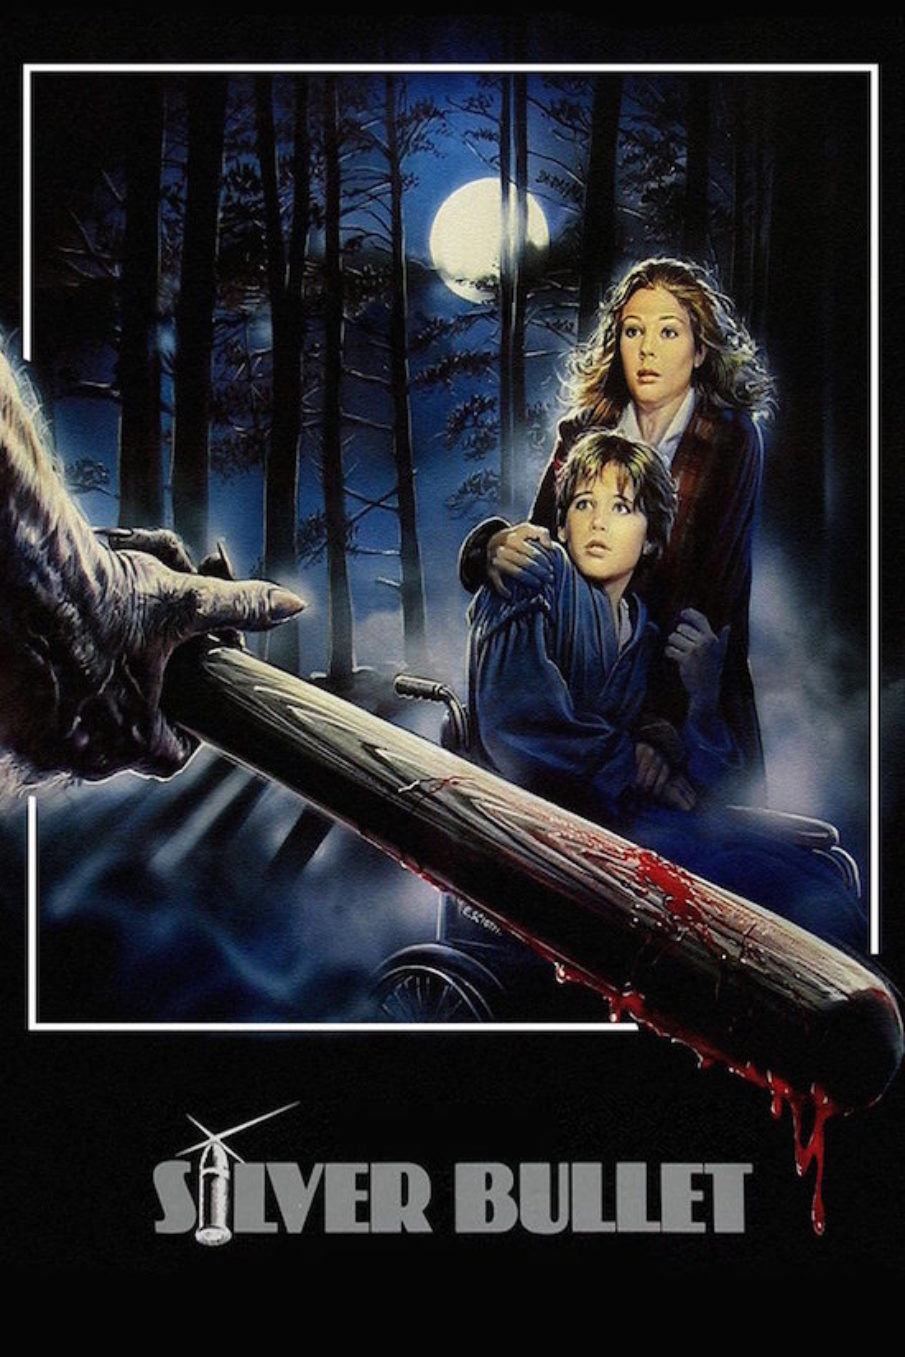 Silver Bullet (1985) – 31 Days of Halloween